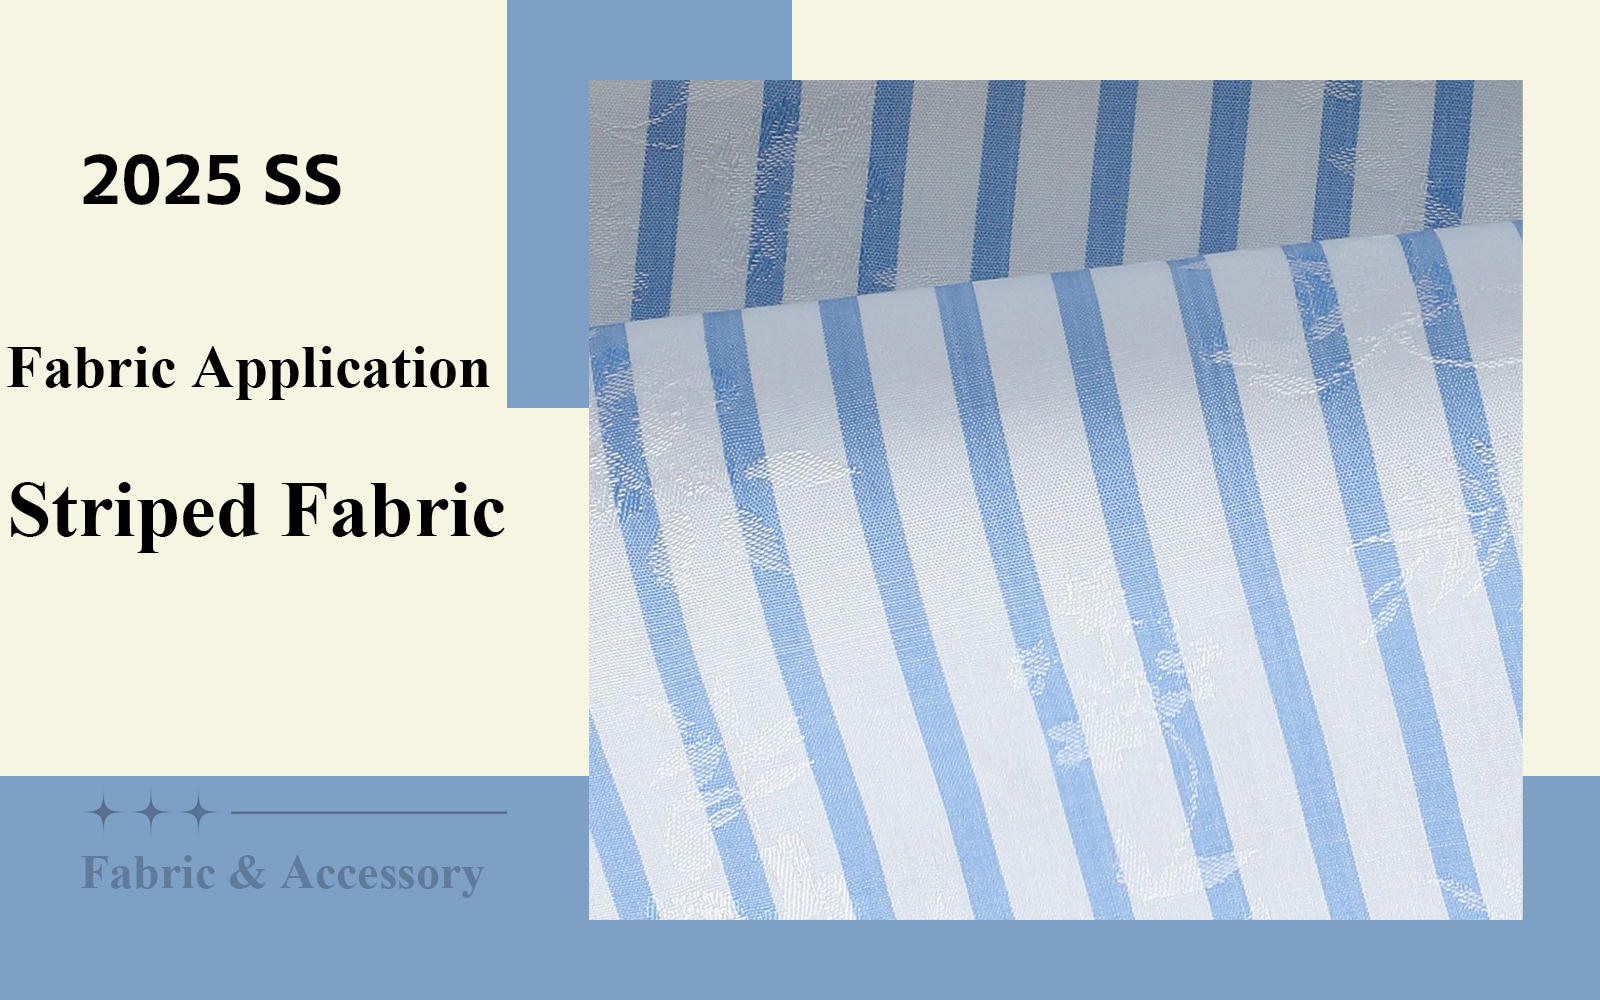 The Fabric Trend for Women's Striped Fabric